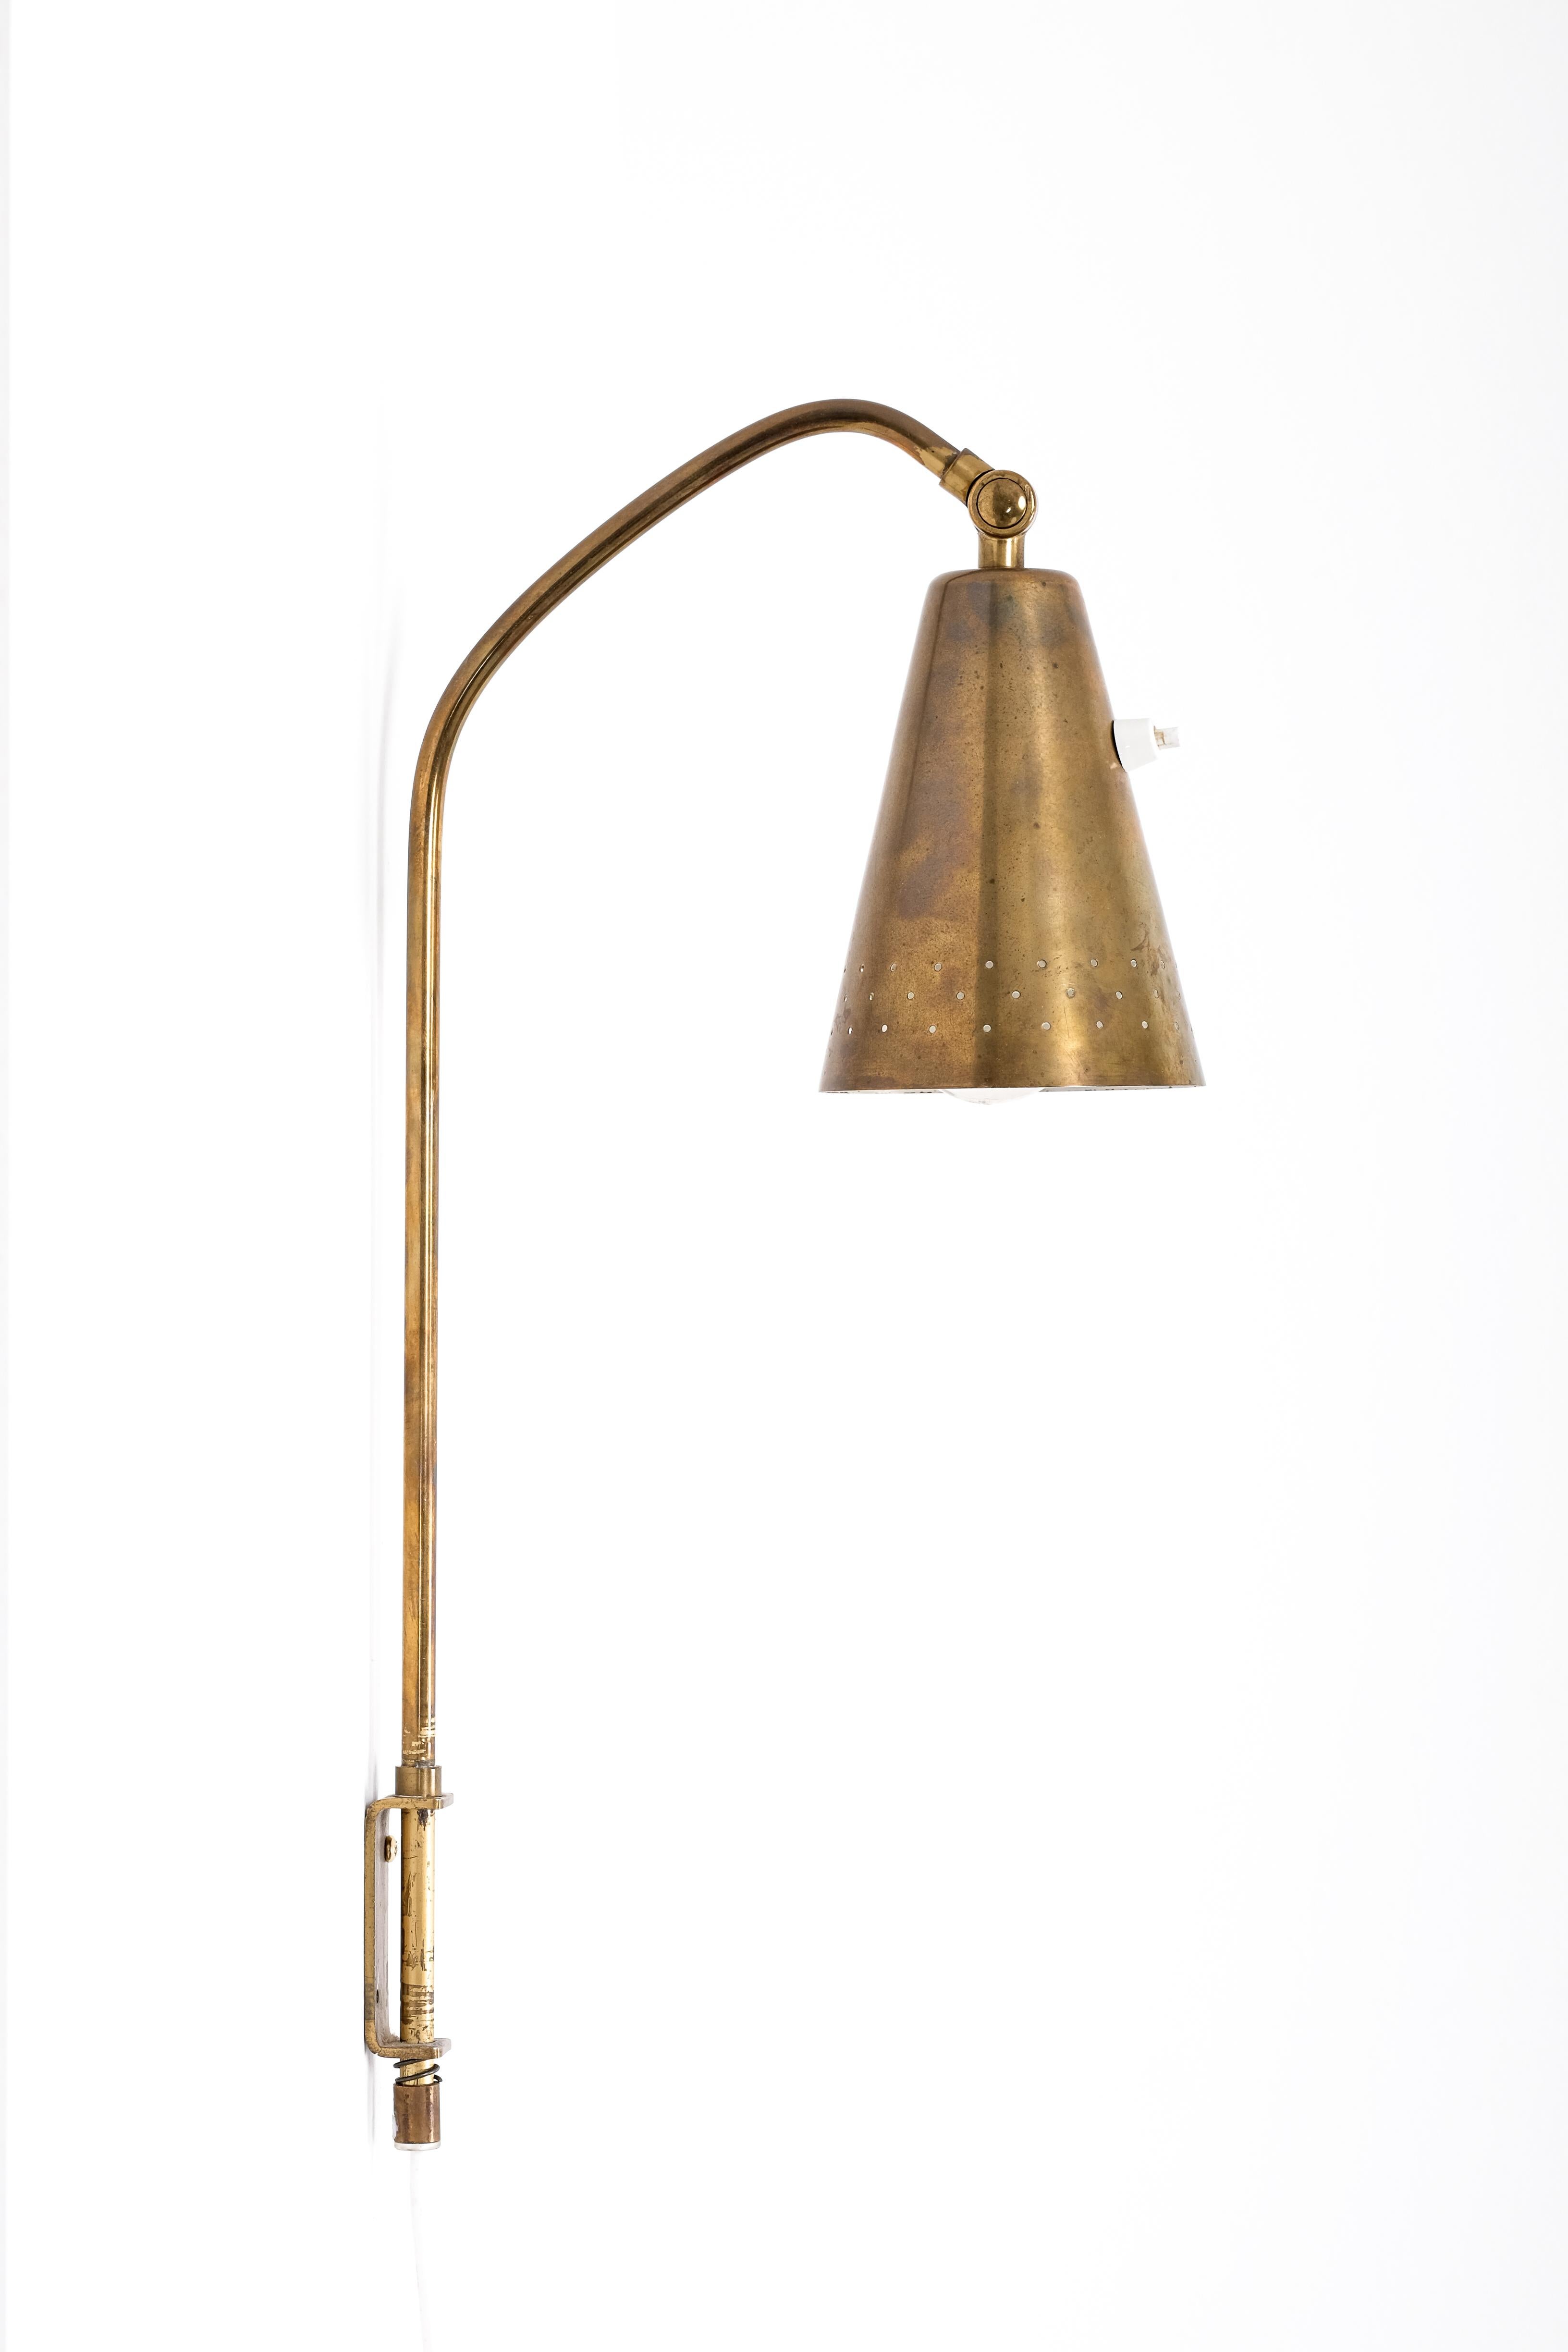 Mid-20th Century Pair of Brass Wall Lamps by Alf Svensson, Sweden, 1950s For Sale